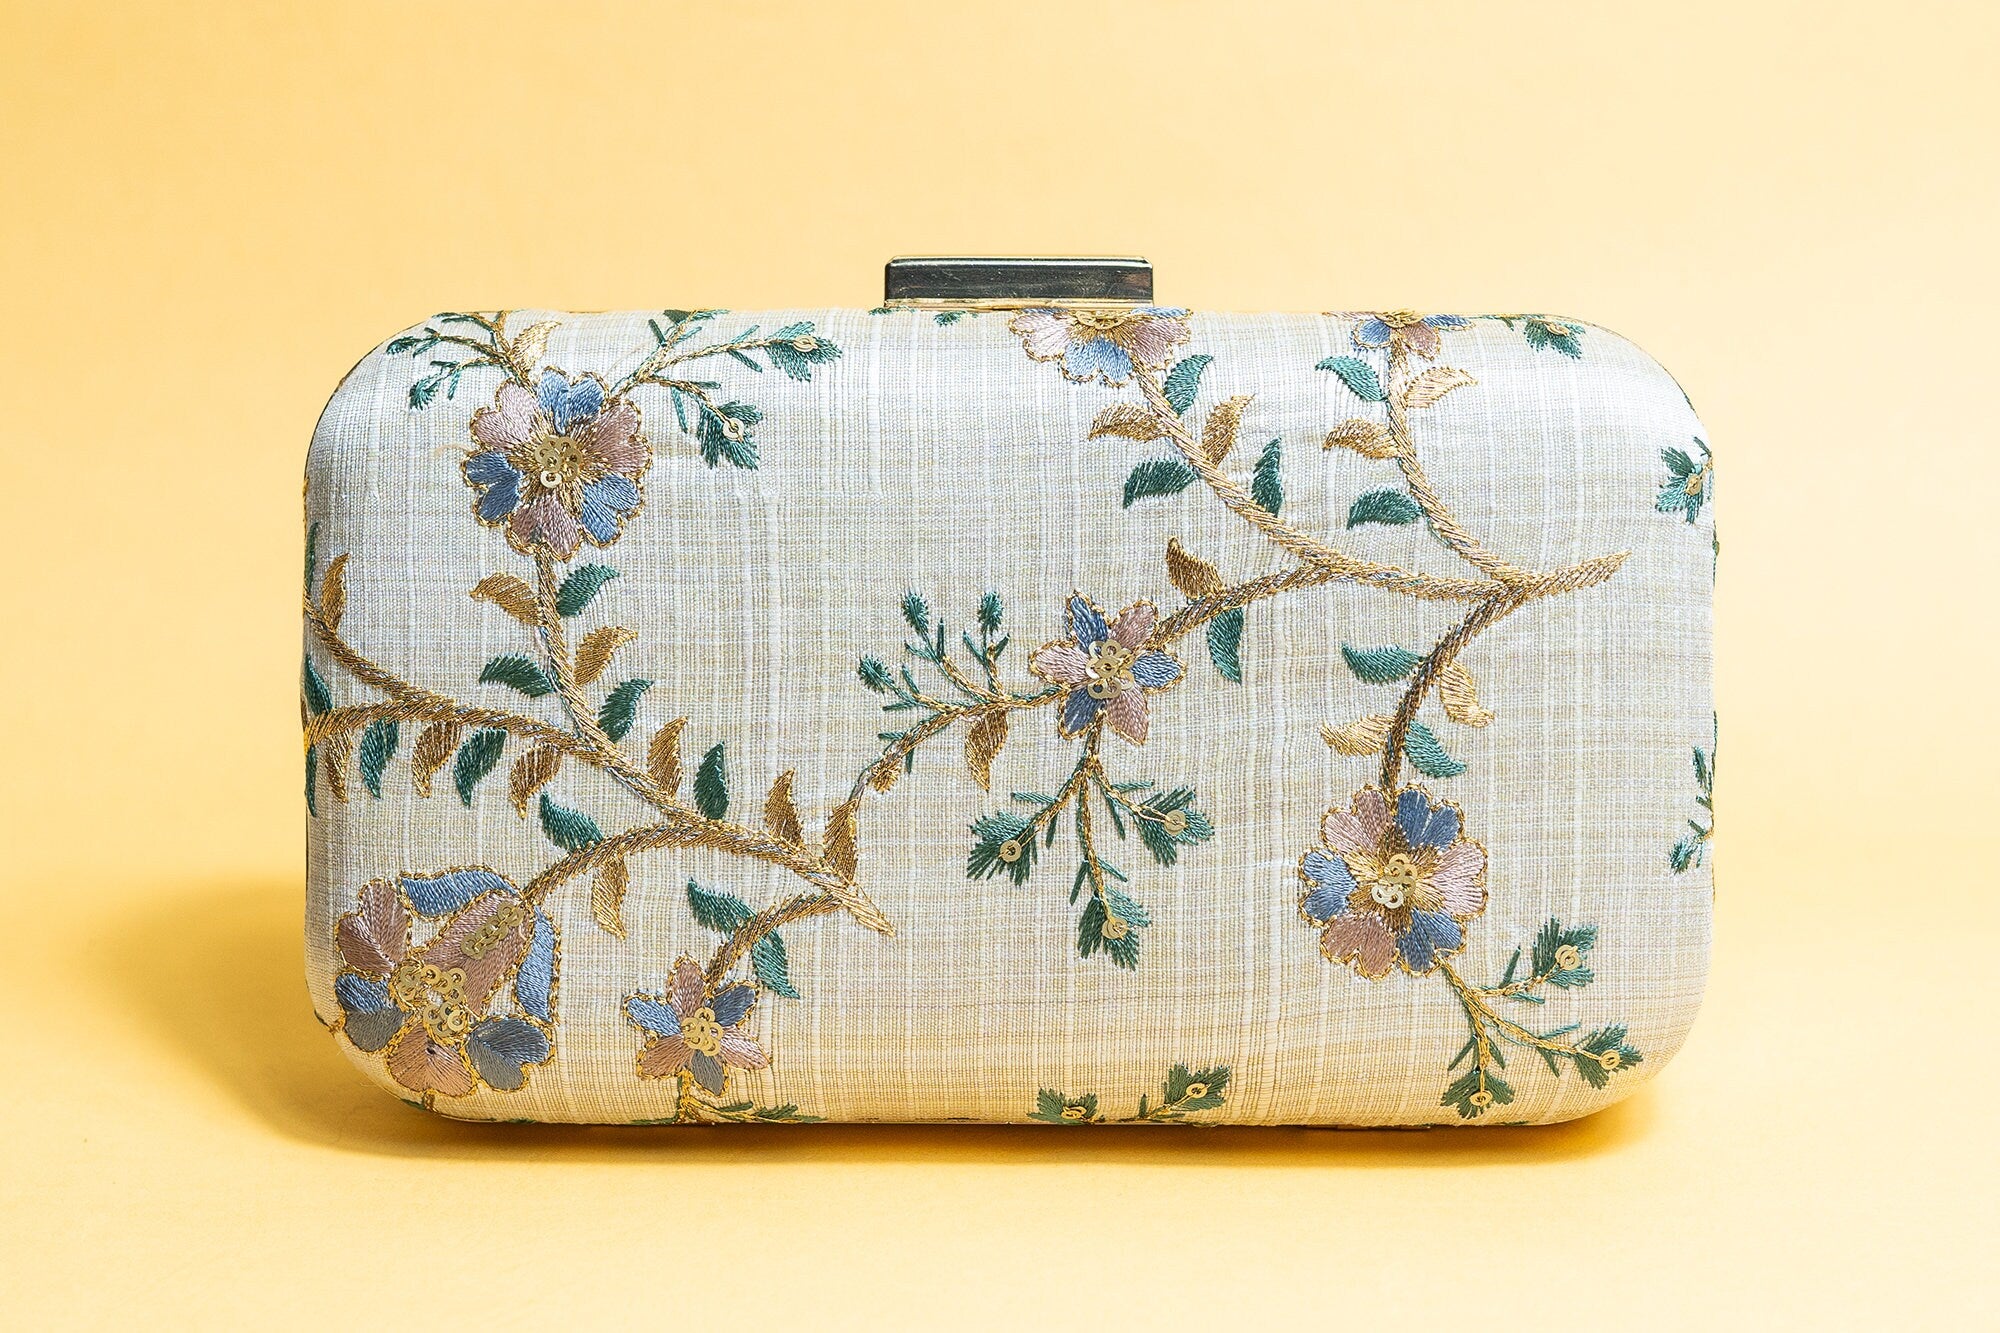 Pastel silk clutch purse/bag, hand made embroidery clutch bag with detachable metal sling